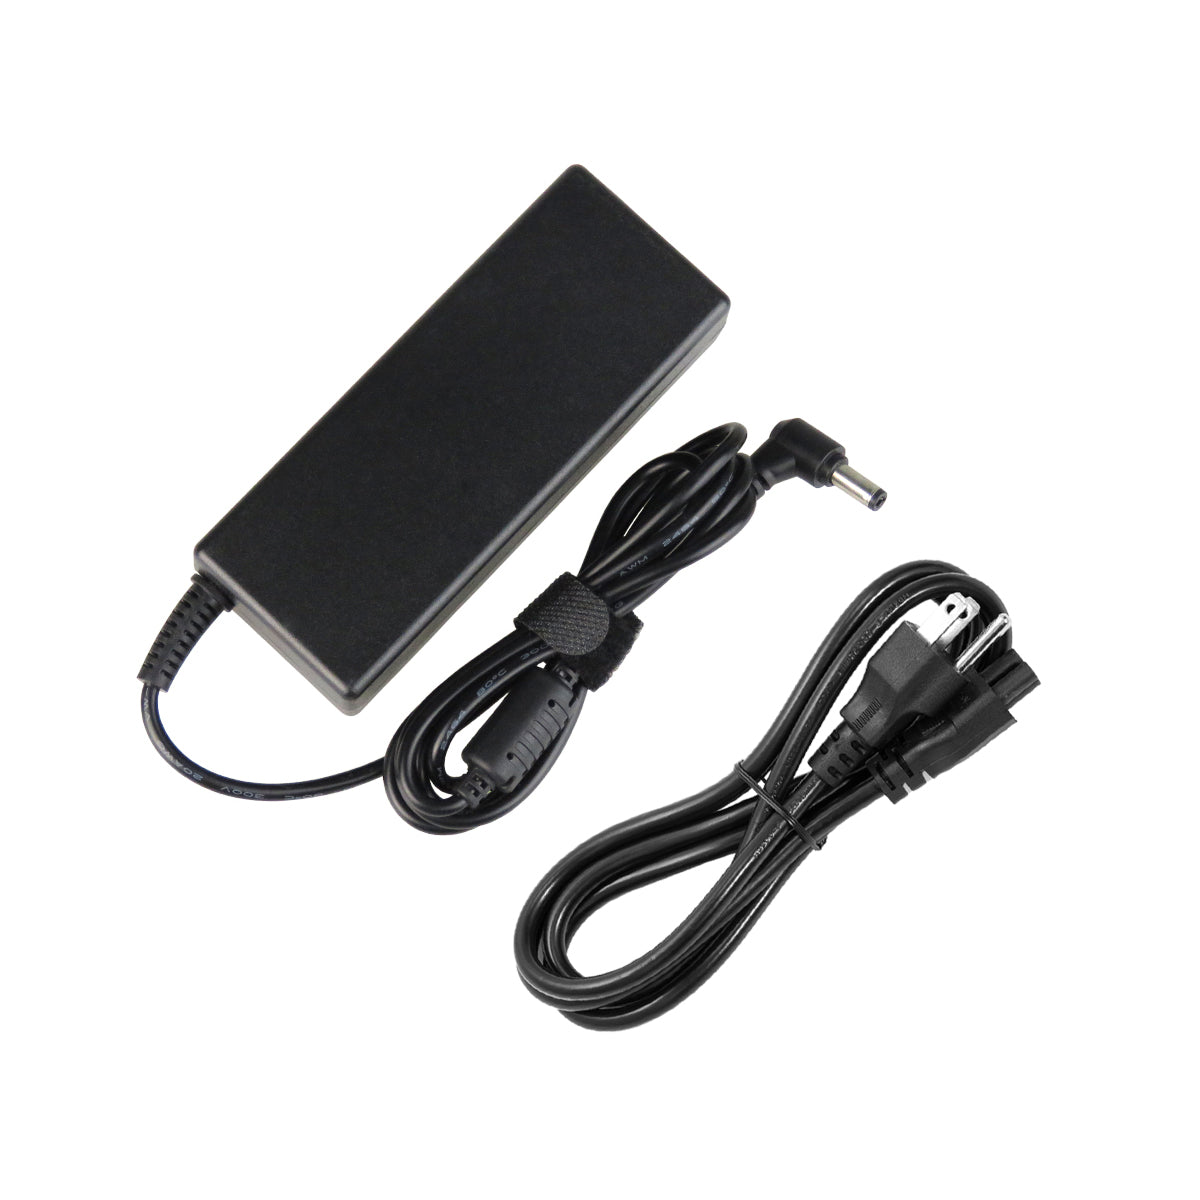 AC Adapter Charger for ASUS X54C-BBK9 Notebook.